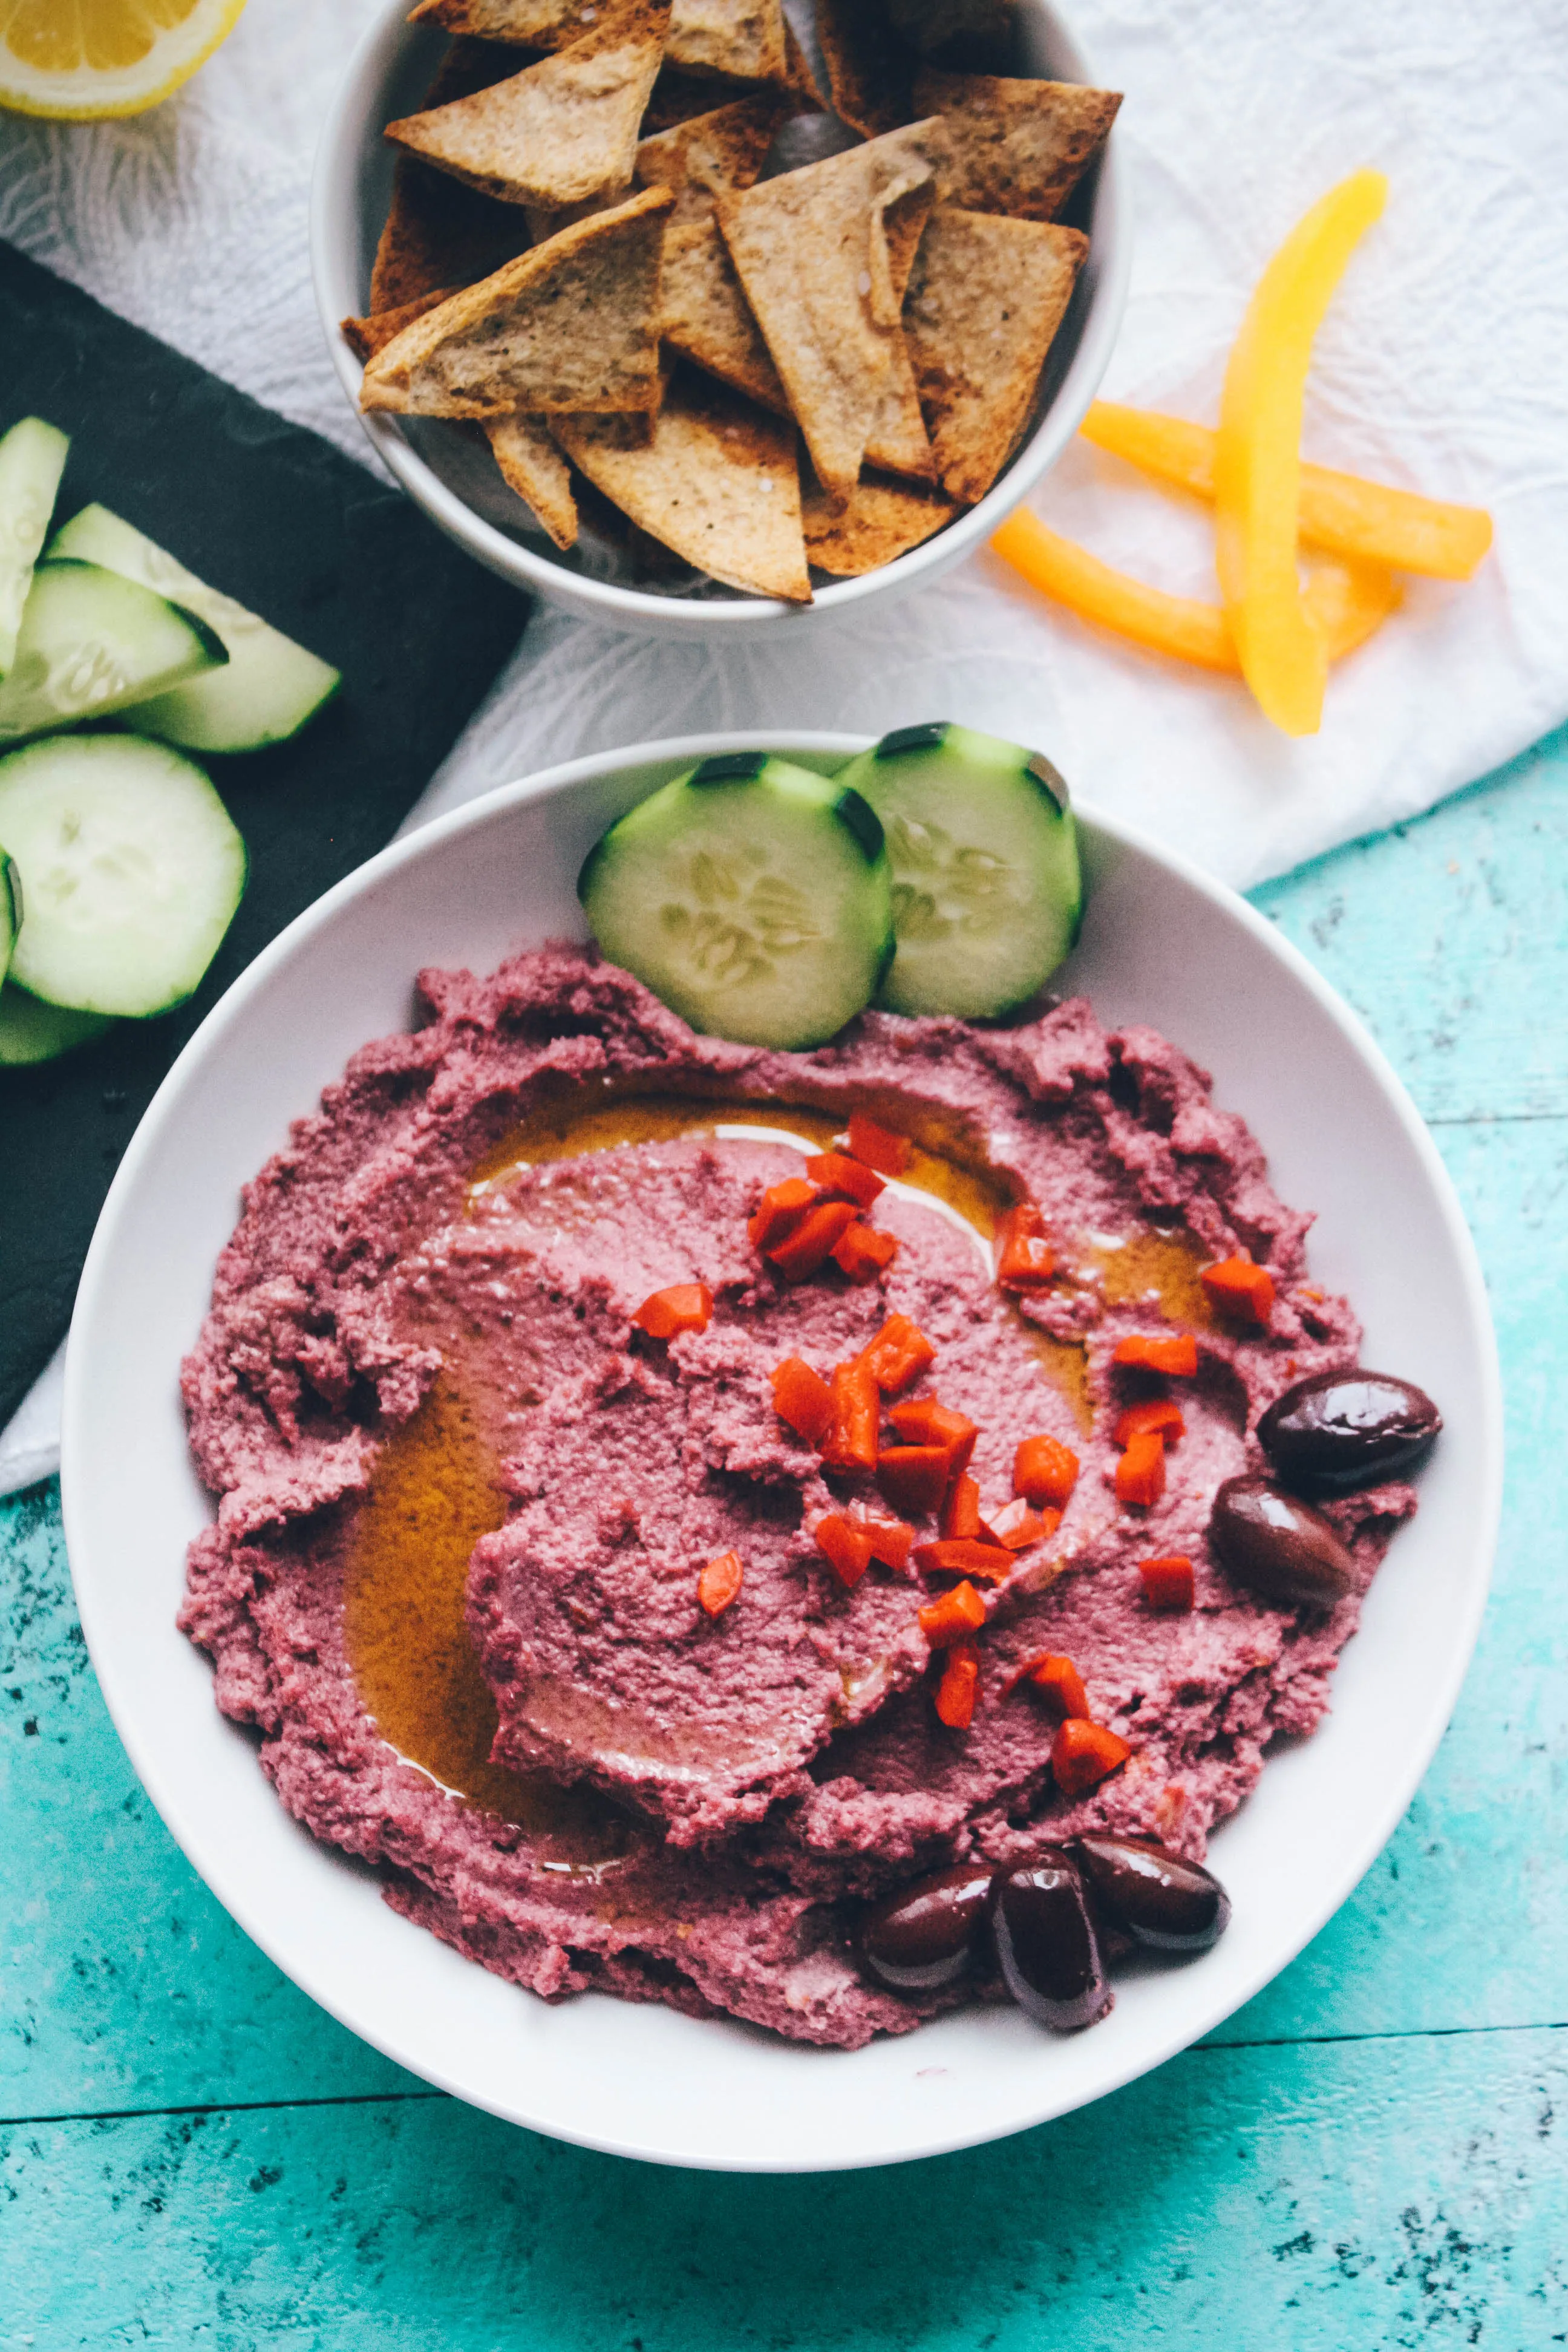 Roasted Garlic and Purple Cauliflower Hummus is a delightful snack or appetizer. Roasted Garlic and Purple Cauliflower Hummus is great if you're looking for a lower-carb snack!